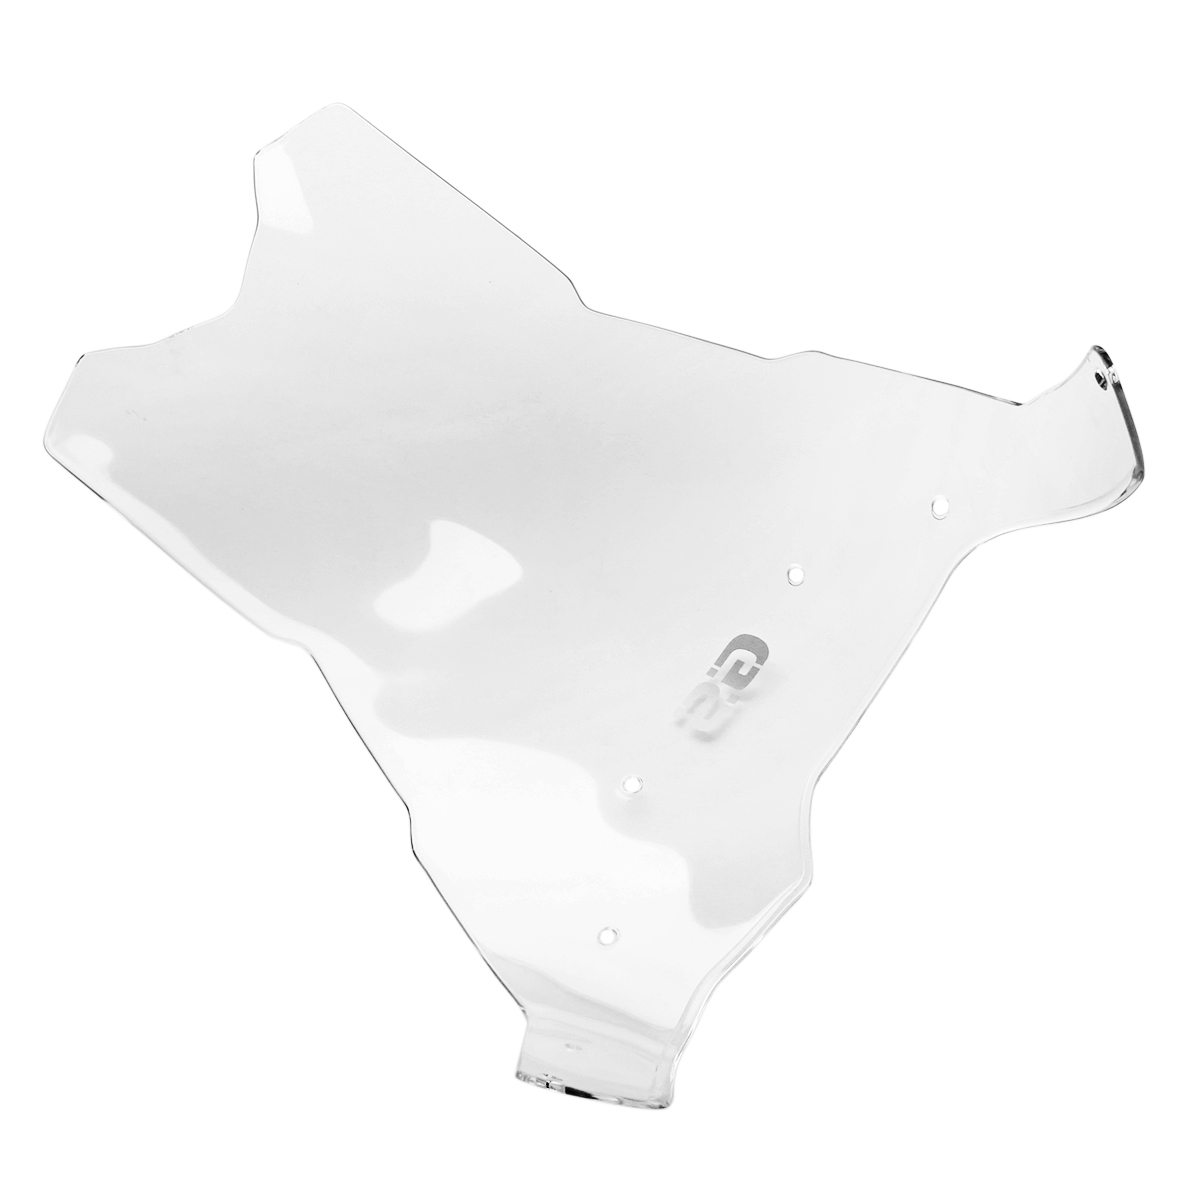 Motorcycle Windshield Windscreen Fairing Part for BMW F800GS F650GS 08-16